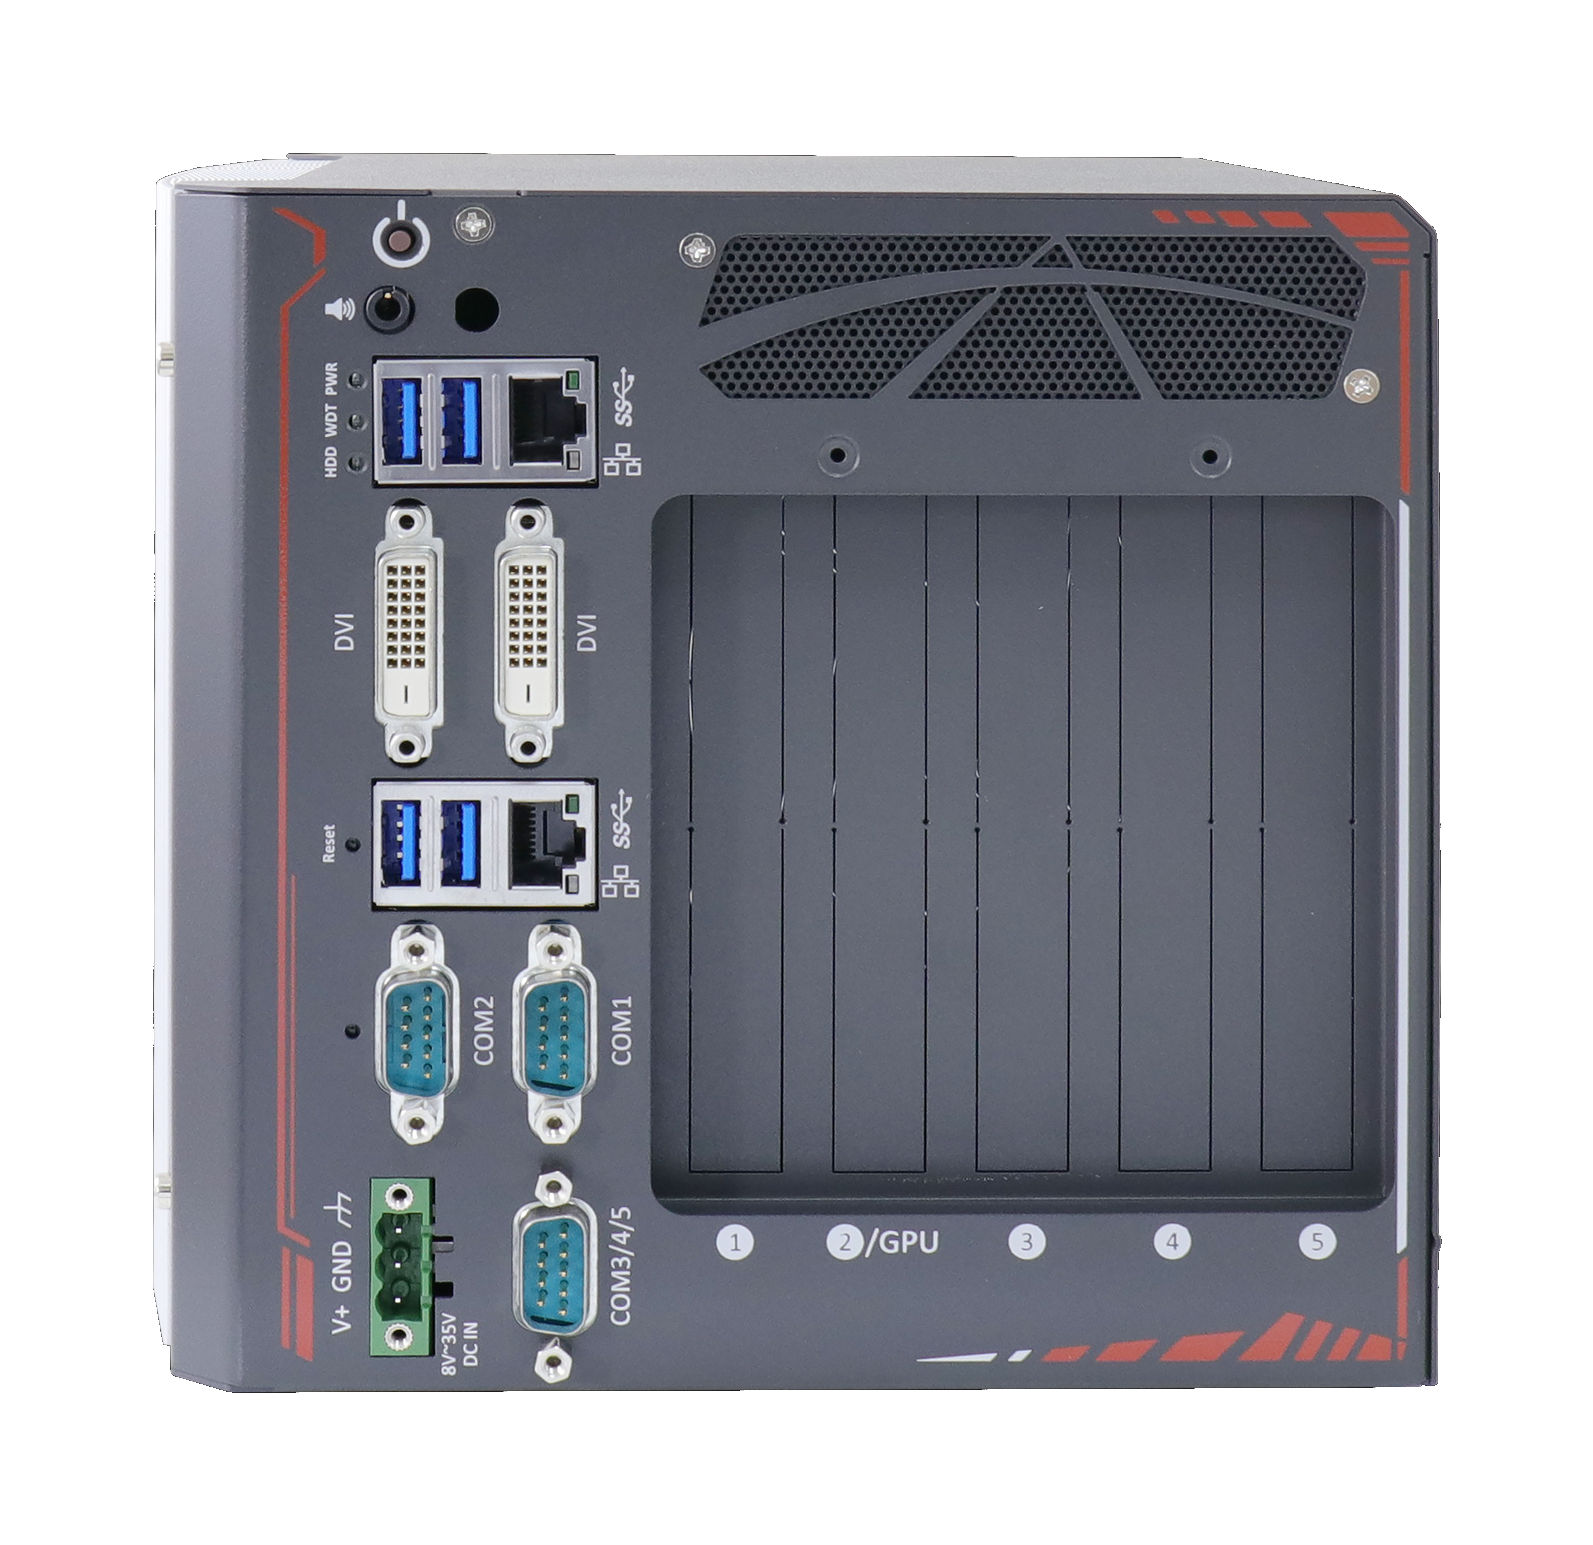 Nuvo-8032 front I/O